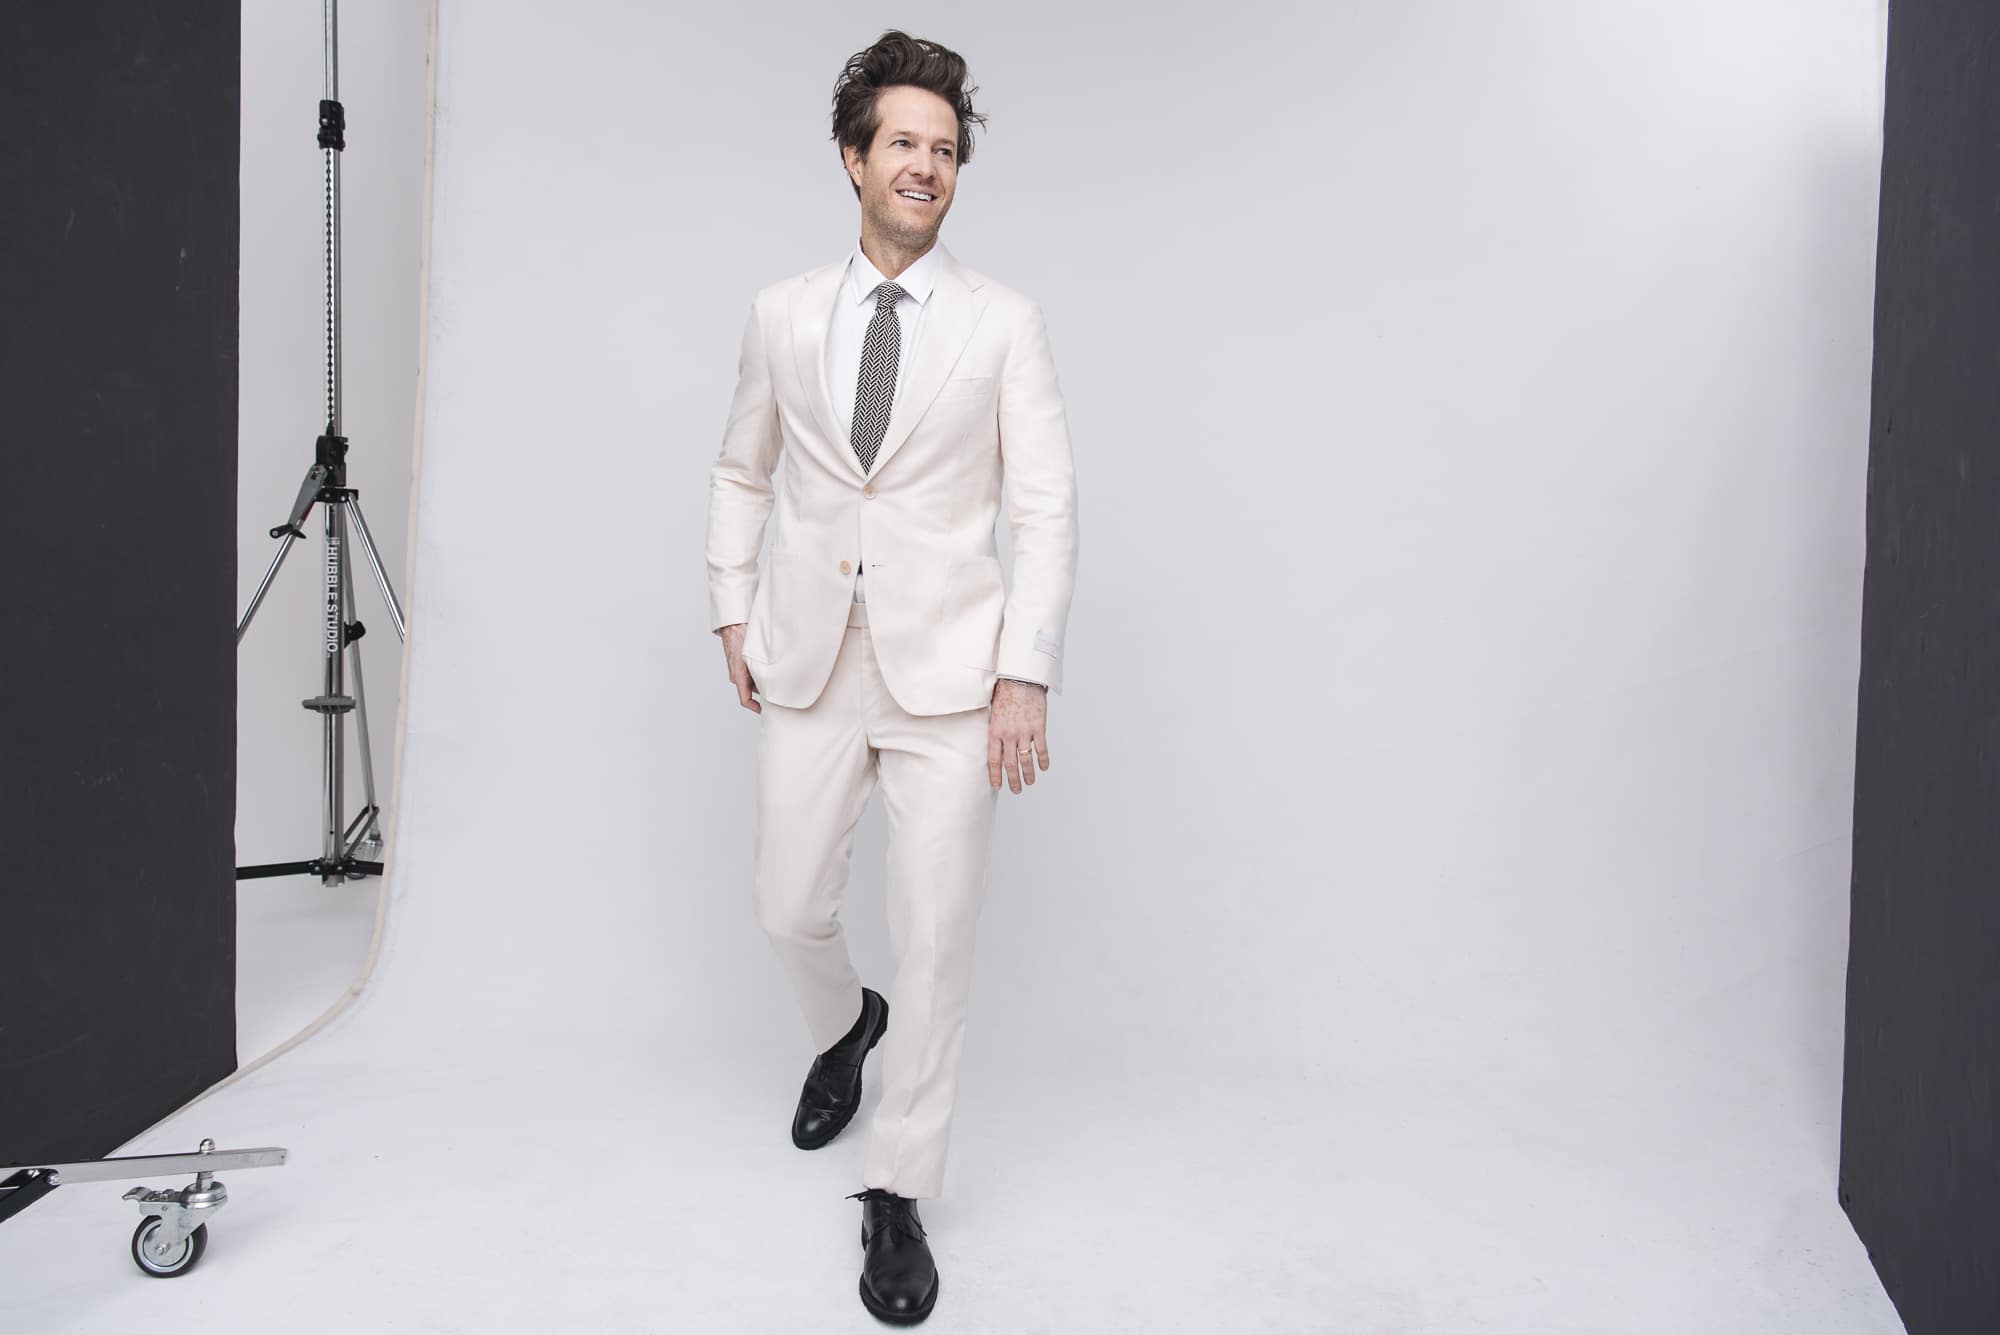 Oli wears ivory suit, white shirt by SAMUELSOHN. Shoes by GEORGE ESQUIVEL. Tie, stylist’s own.